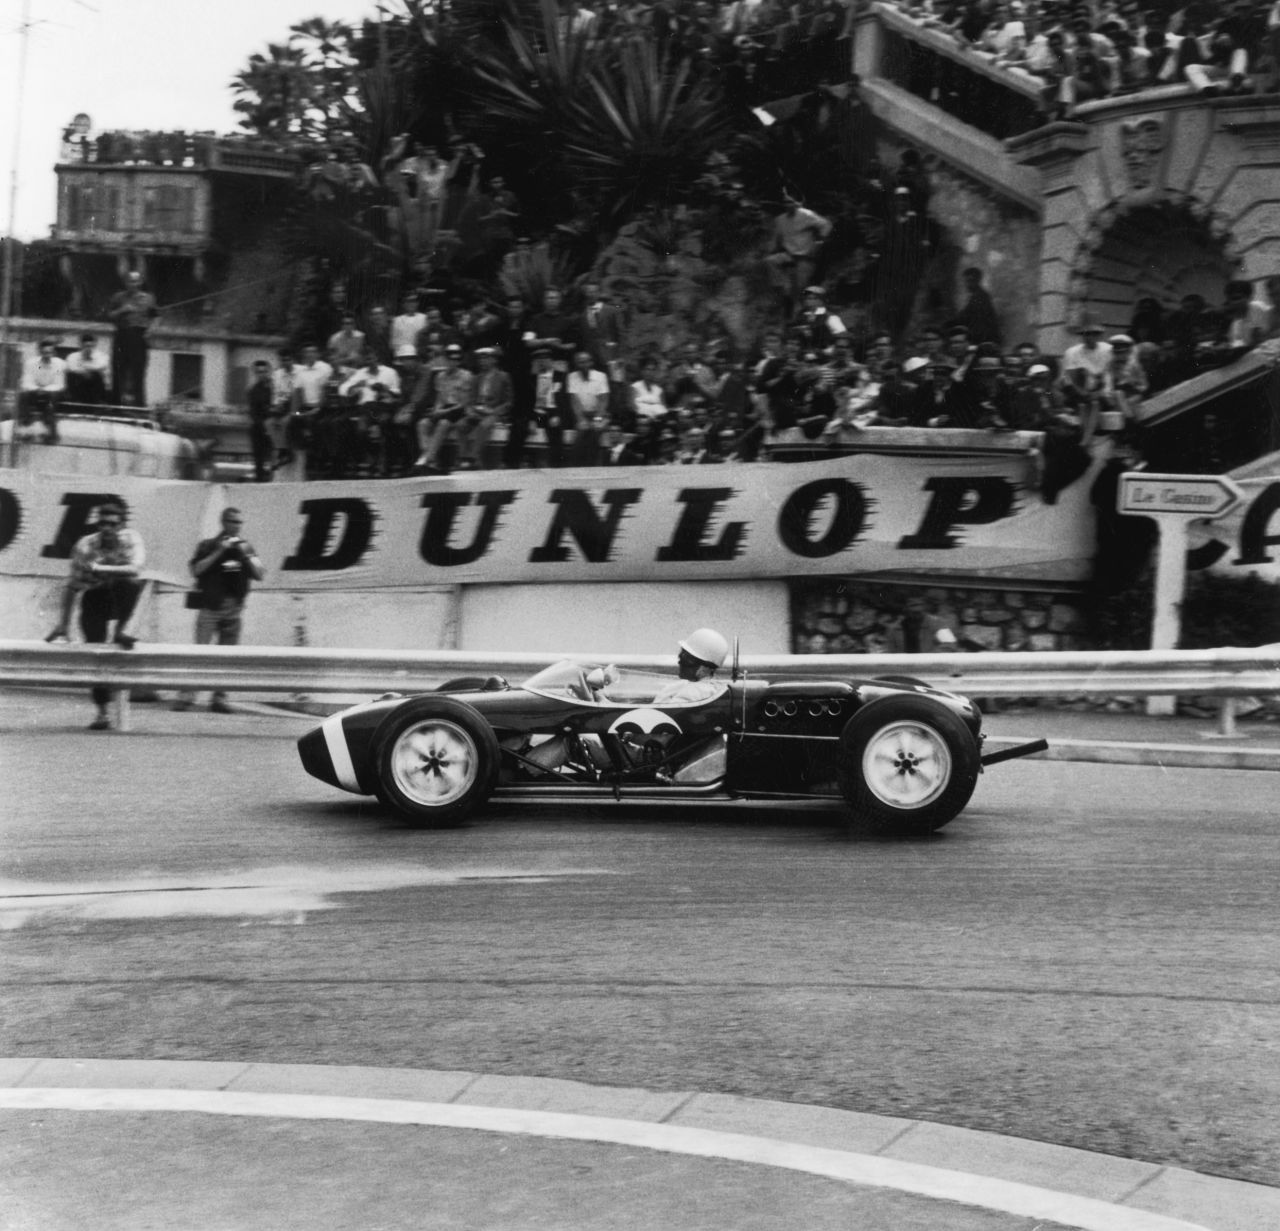 Monaco's street circuit is relatively unchanged since Formula One cars began racing there in 1950. Stirling Moss says his victory in Monaco in 1961, shown here, was the best race of his career.